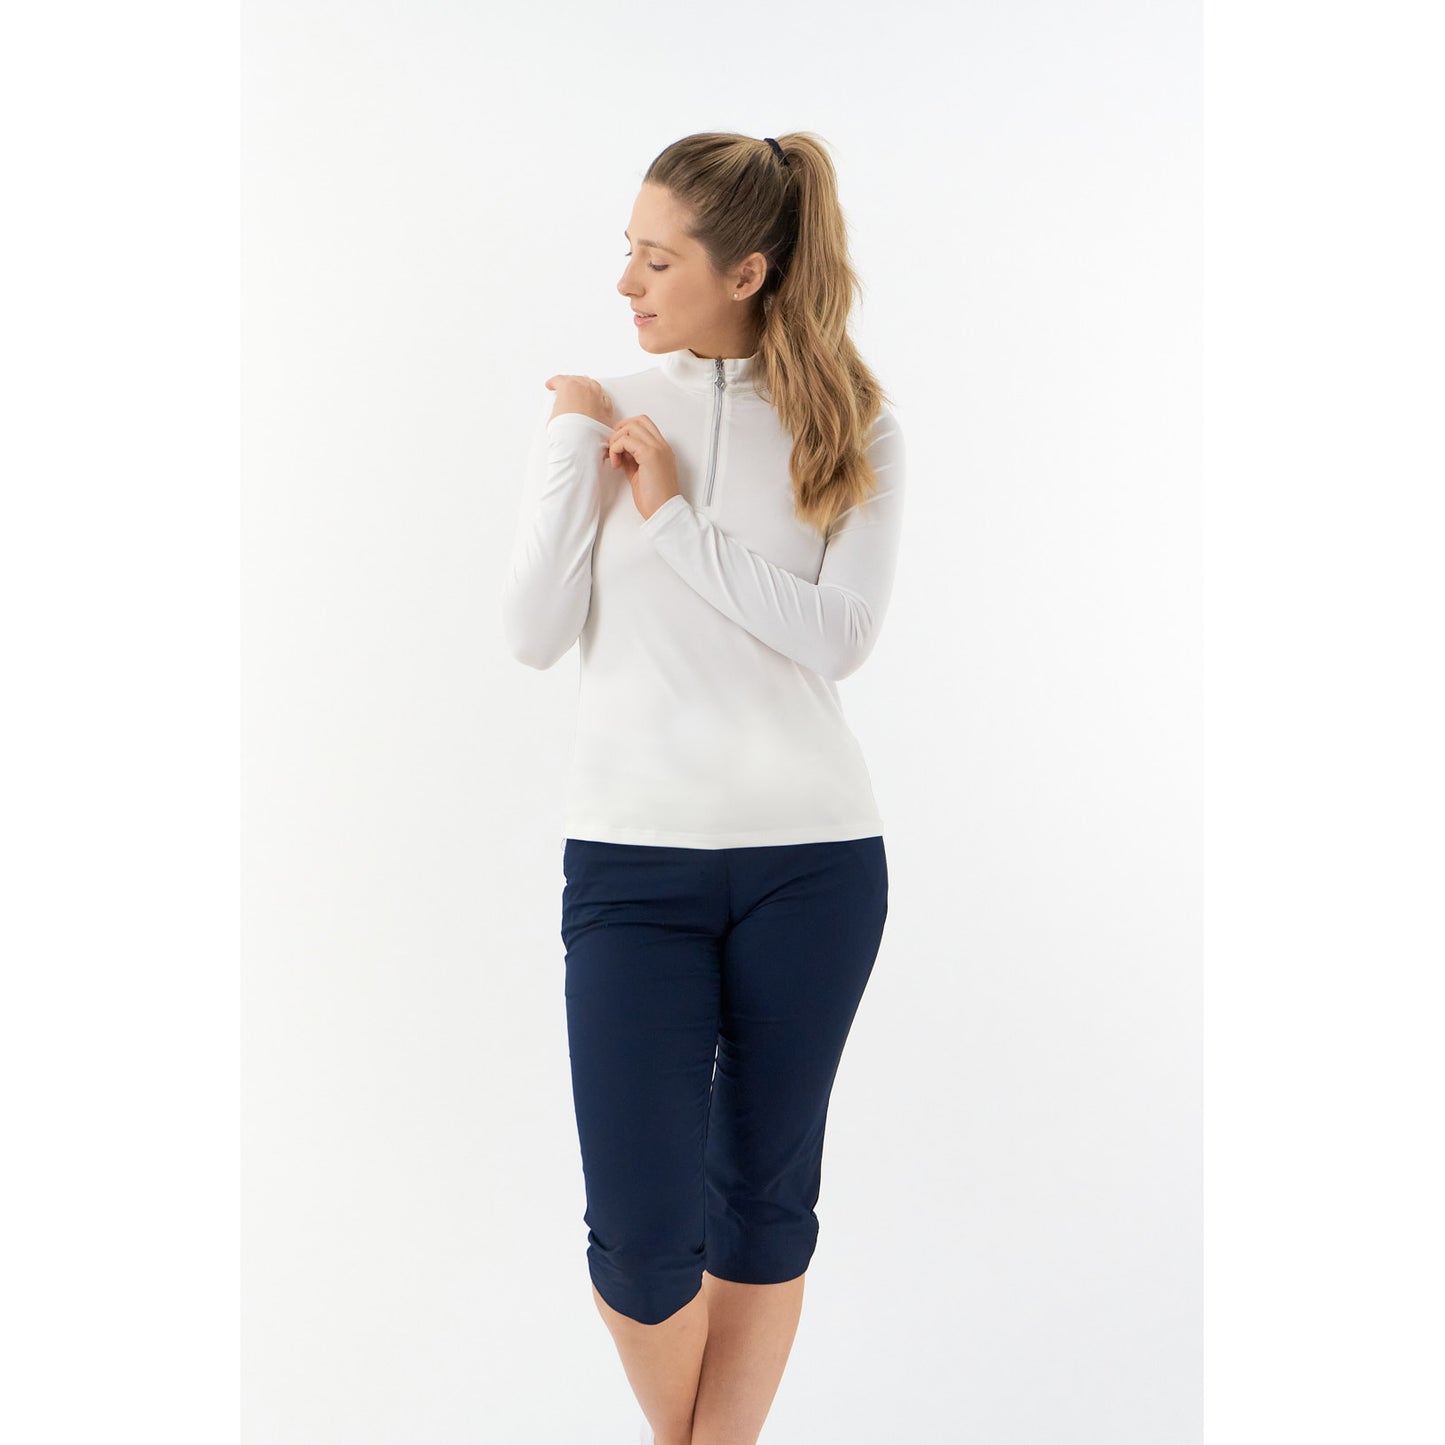 Pure Ladies Lightweight Mid-Layer Top in White